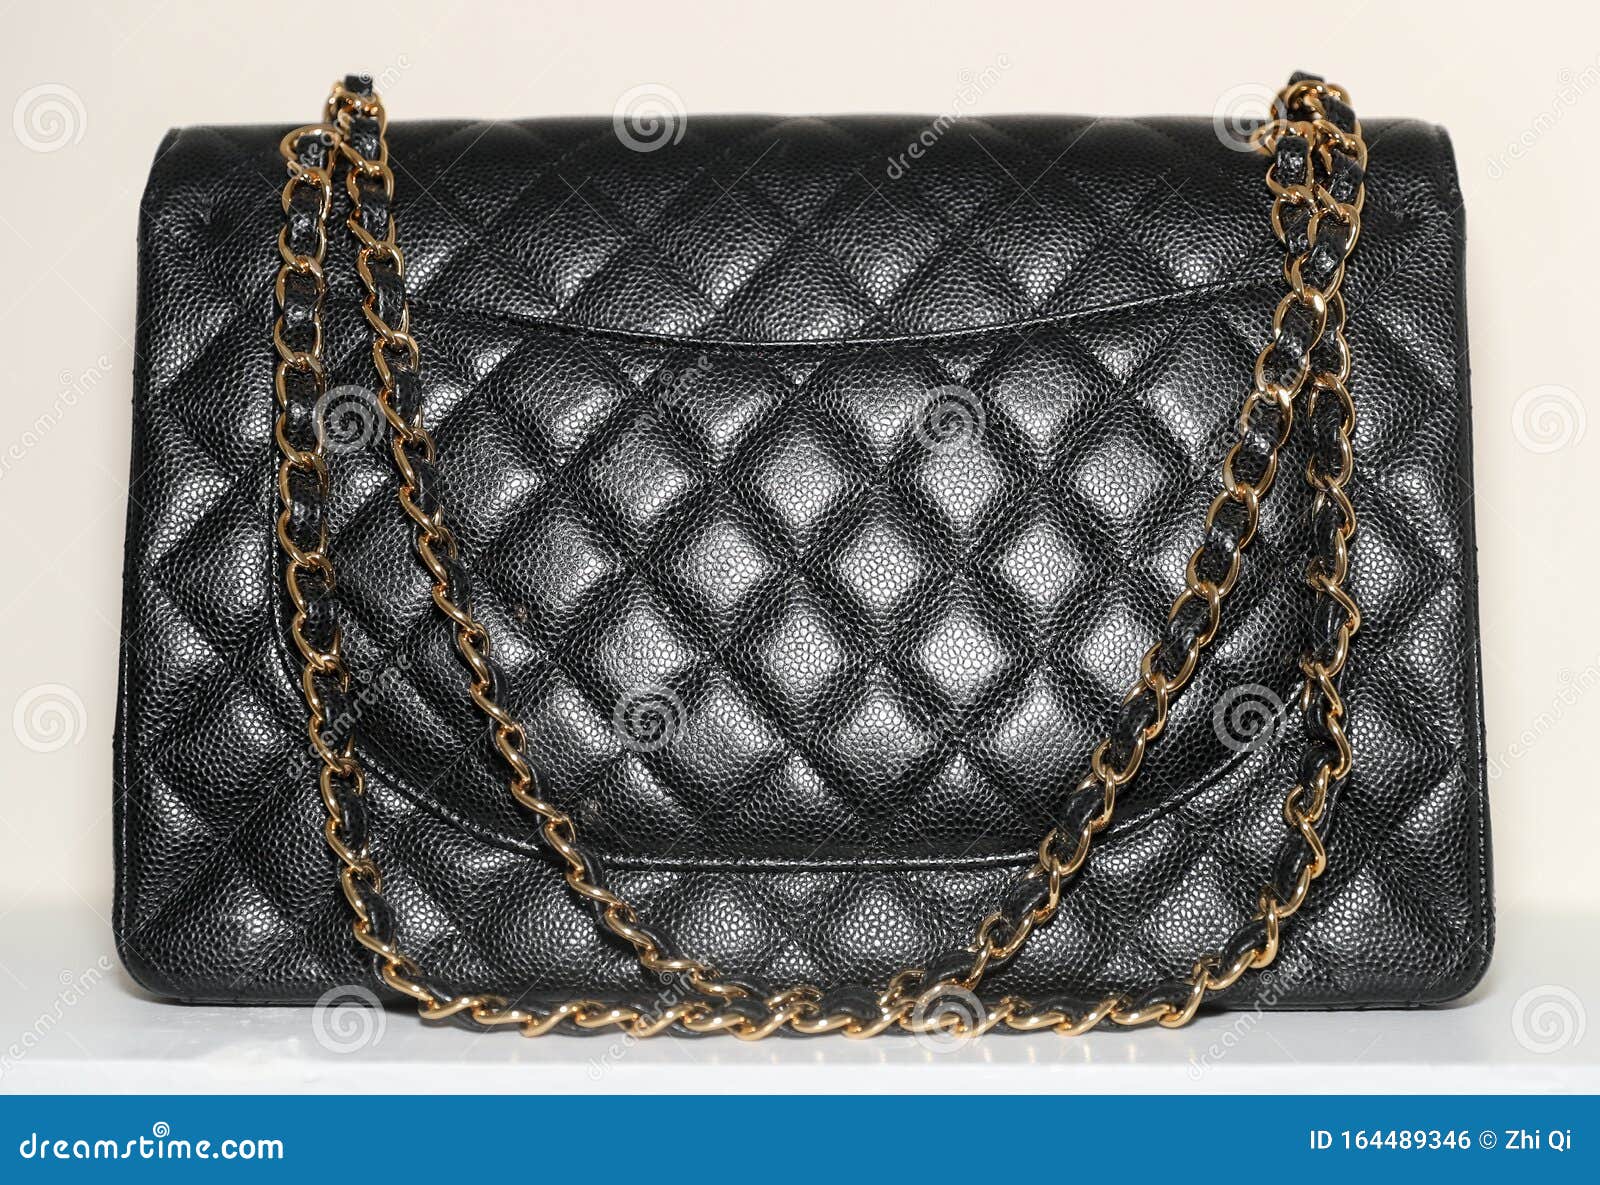 445 Louis Vuitton Handbag Stock Photos - Free & Royalty-Free Stock Photos  from Dreamstime - Page 6